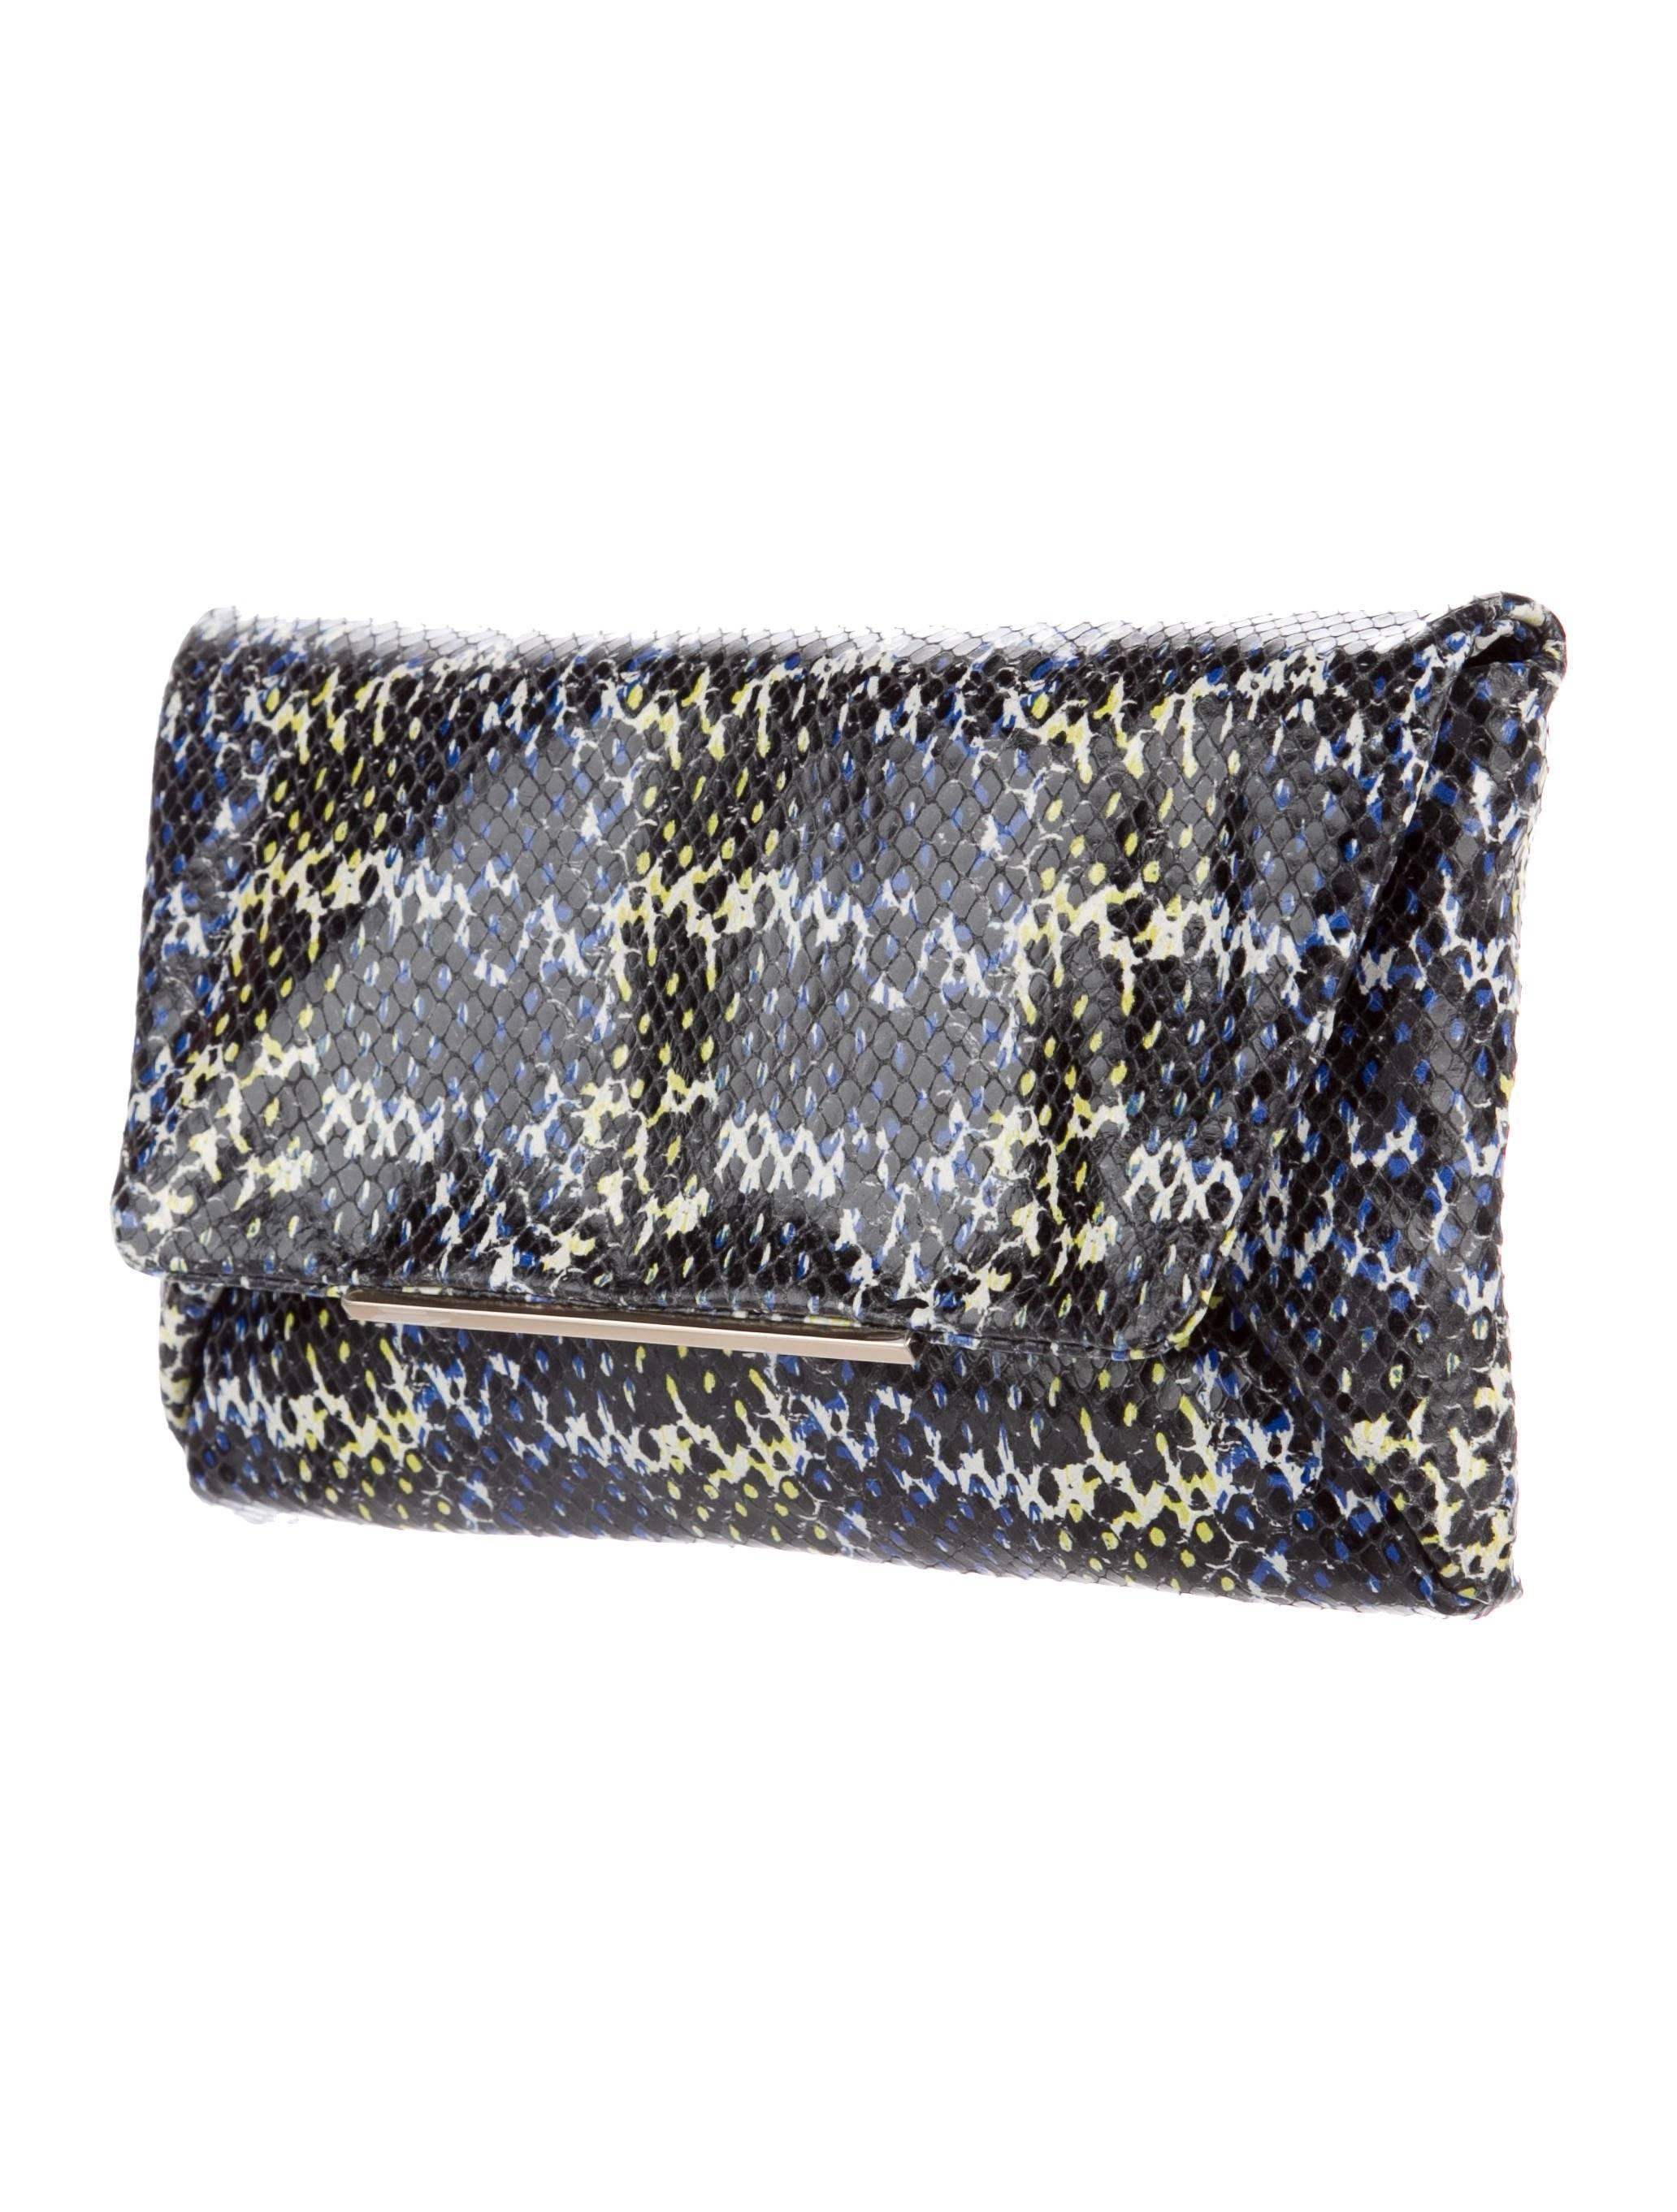 CURATOR'S NOTES

Lanvin New Multi Color Leather Envelope 2 in 1 Evening Clutch Shoulder Flap Bag

Leather 
Gold tone hardware
Woven lining
Magnetic closure 
Removable chain shoulder strap drop 19